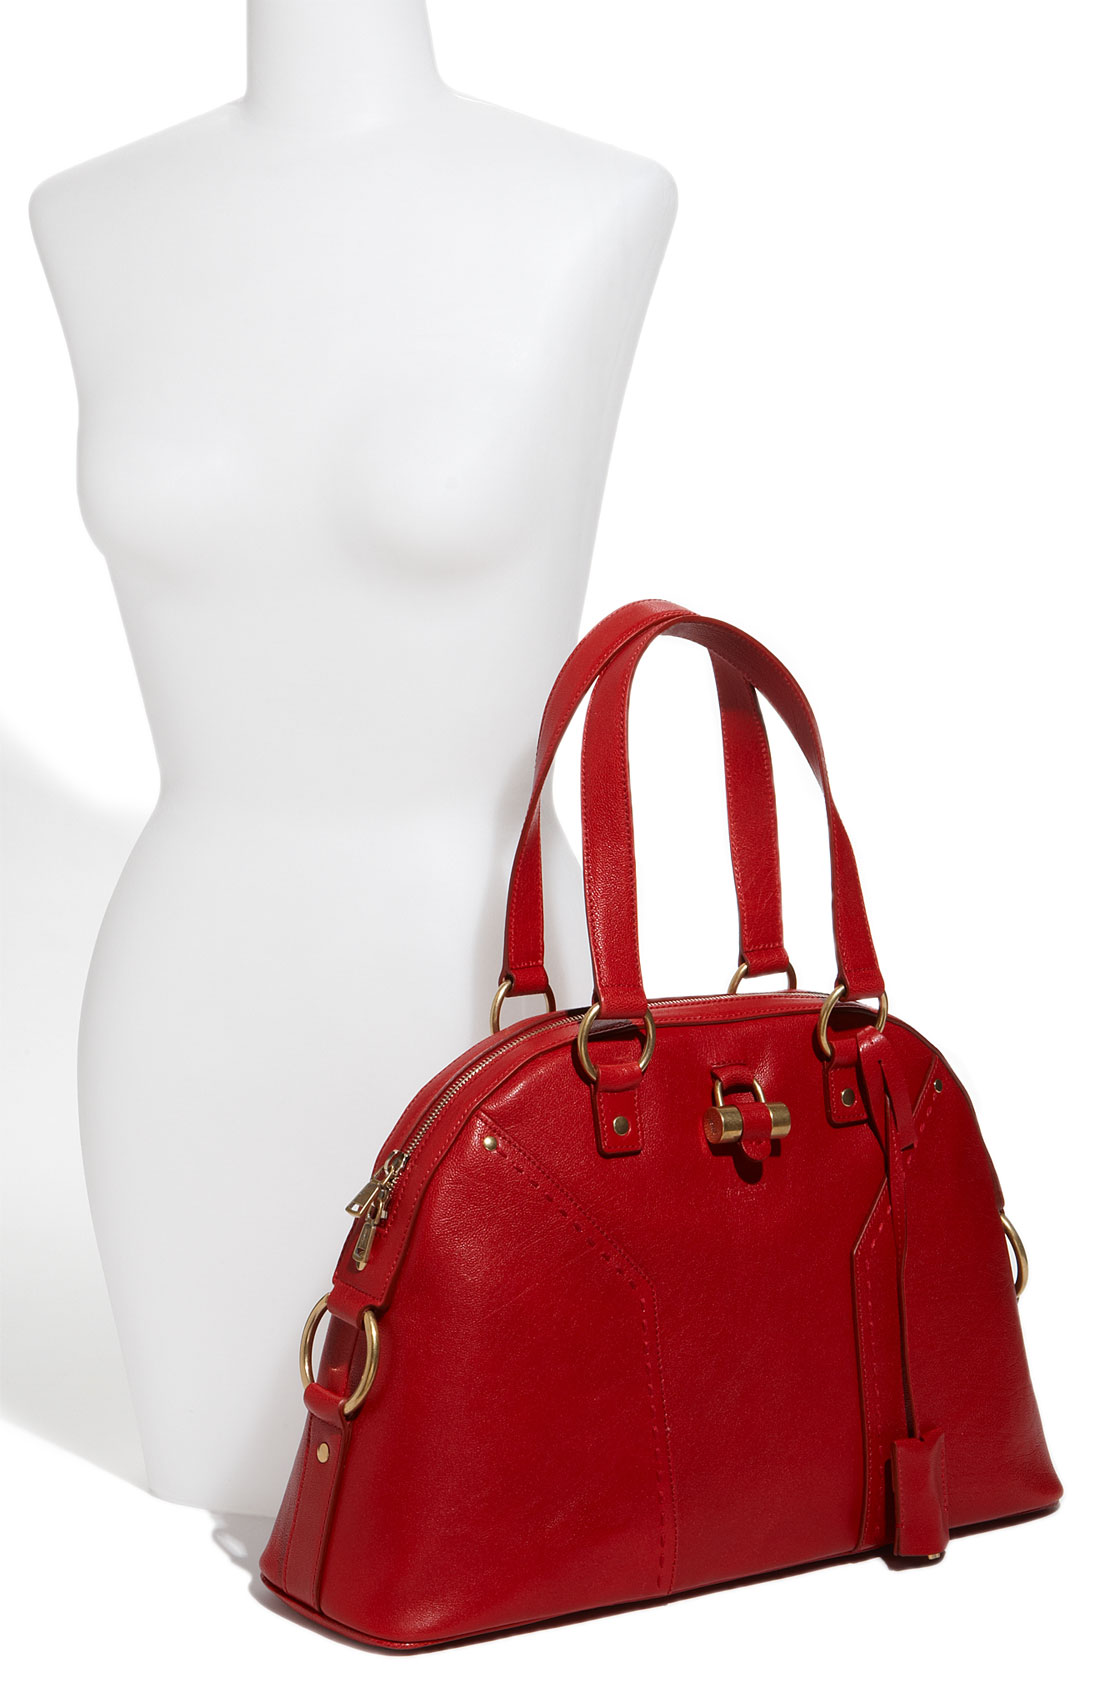 Saint laurent Muse - Large Leather Dome Satchel in Red (poppy) | Lyst  